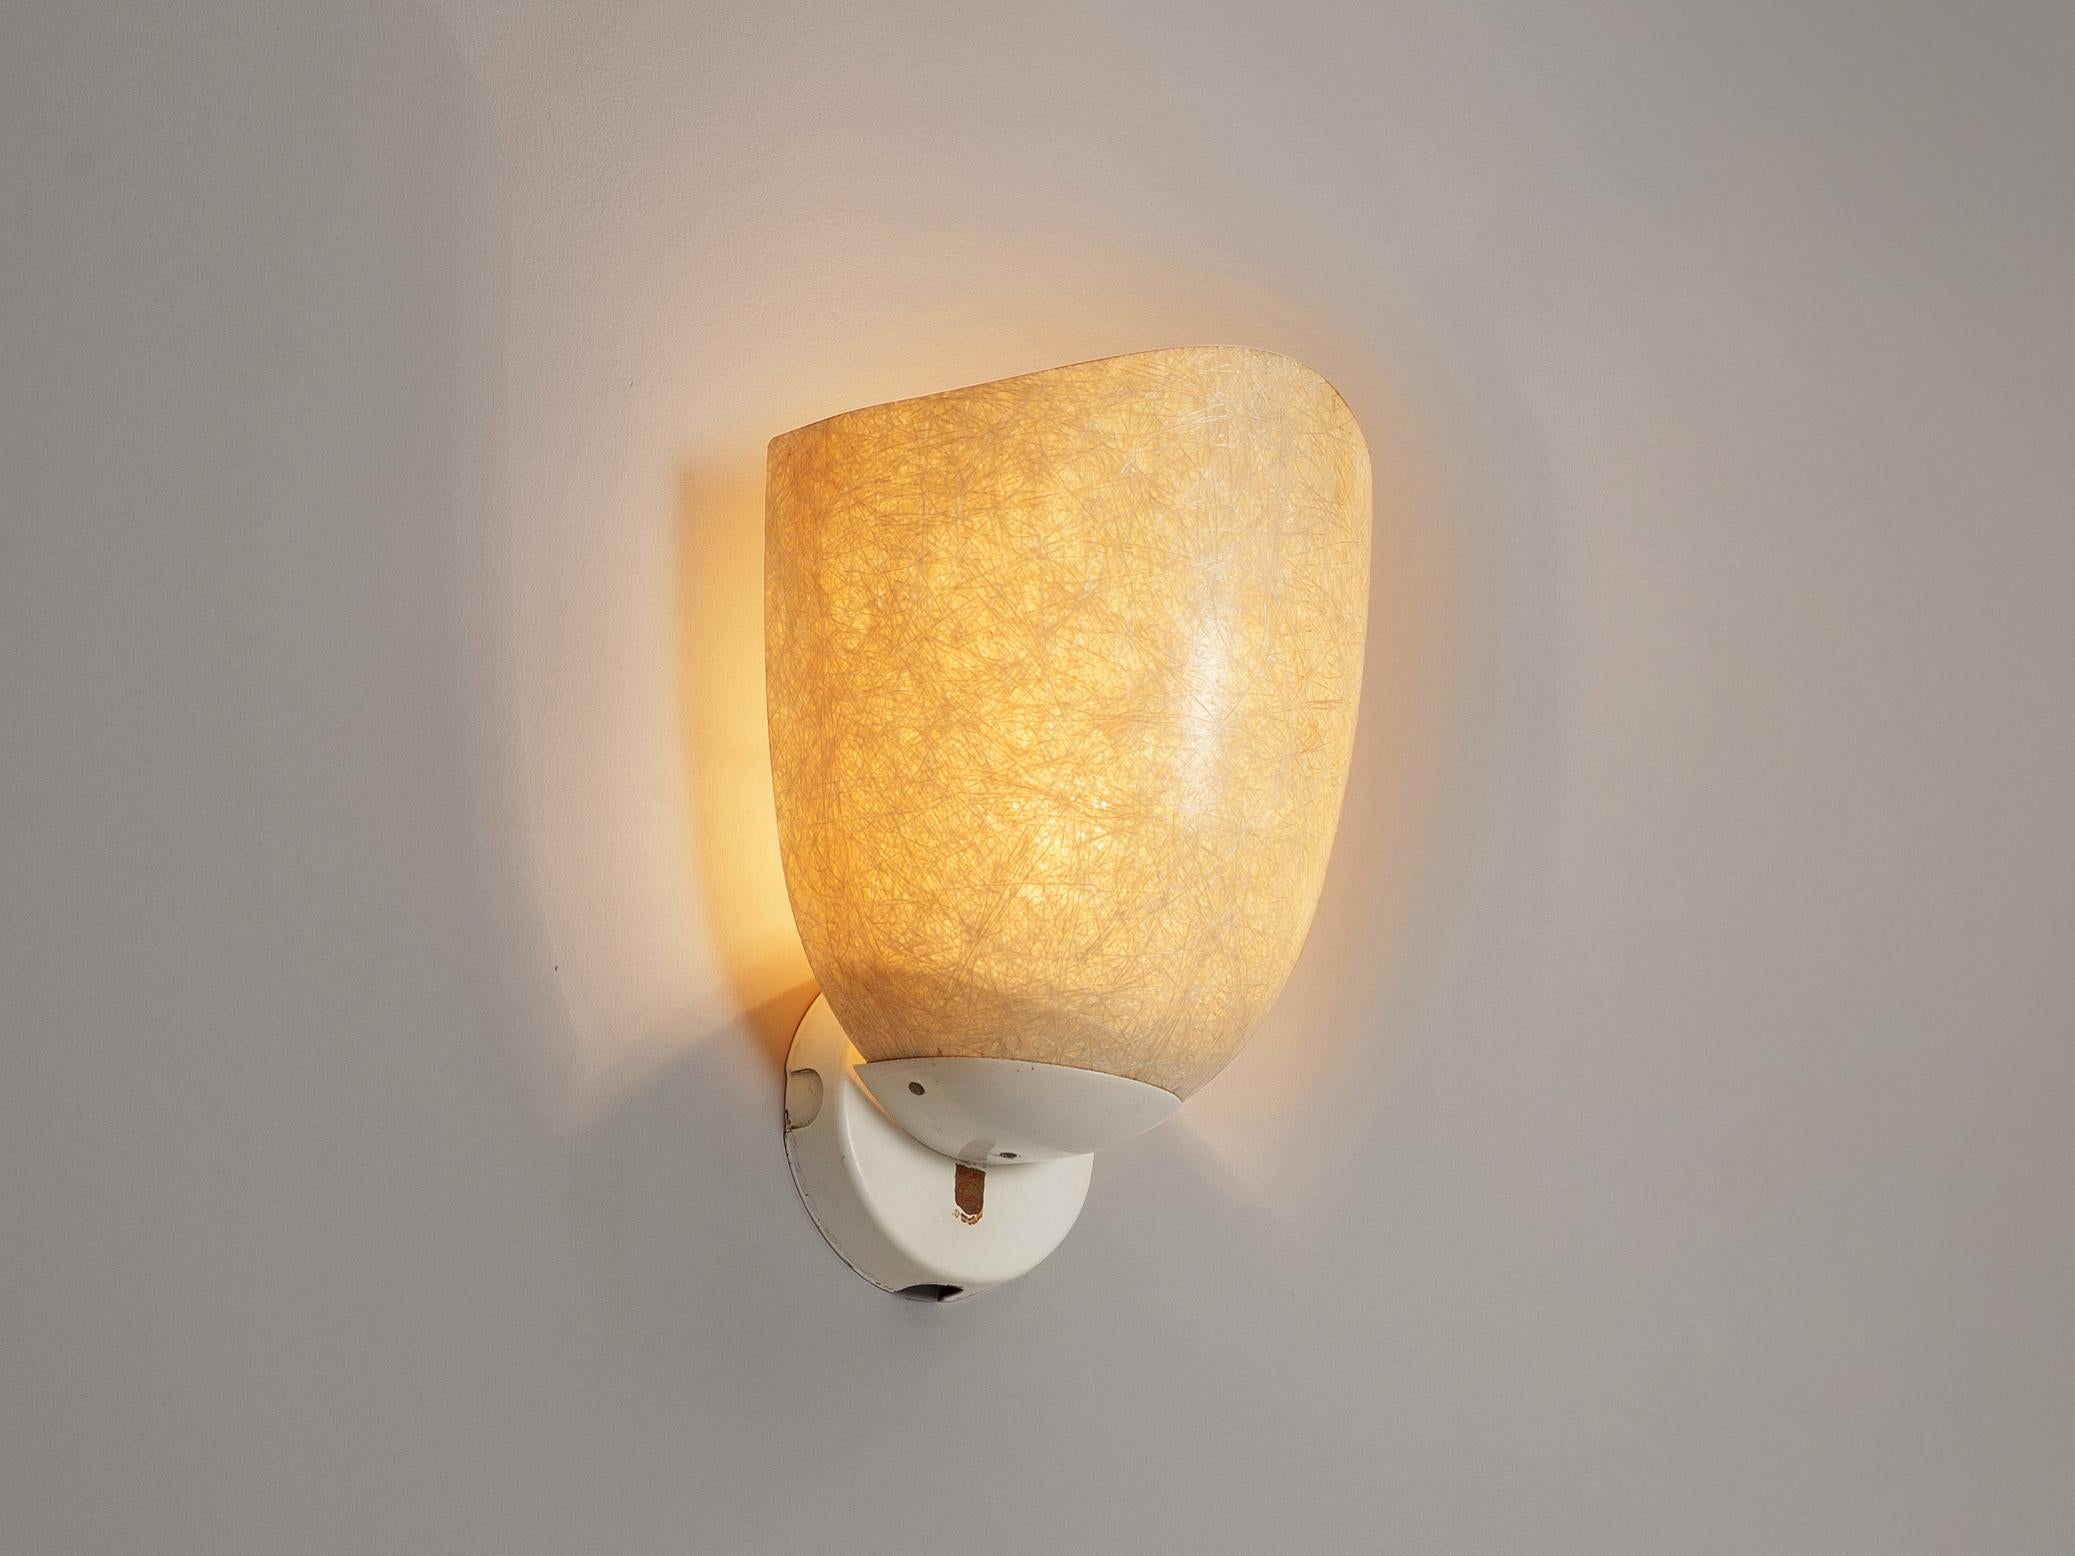 Philips, wall light, fiberglass, plastic, The Netherlands, 1970s

Artistic wall light of the seventies that embodies a nice textured surface executed in fiberglass As a consequence, a transparent and atmospheric light is created. A simple design